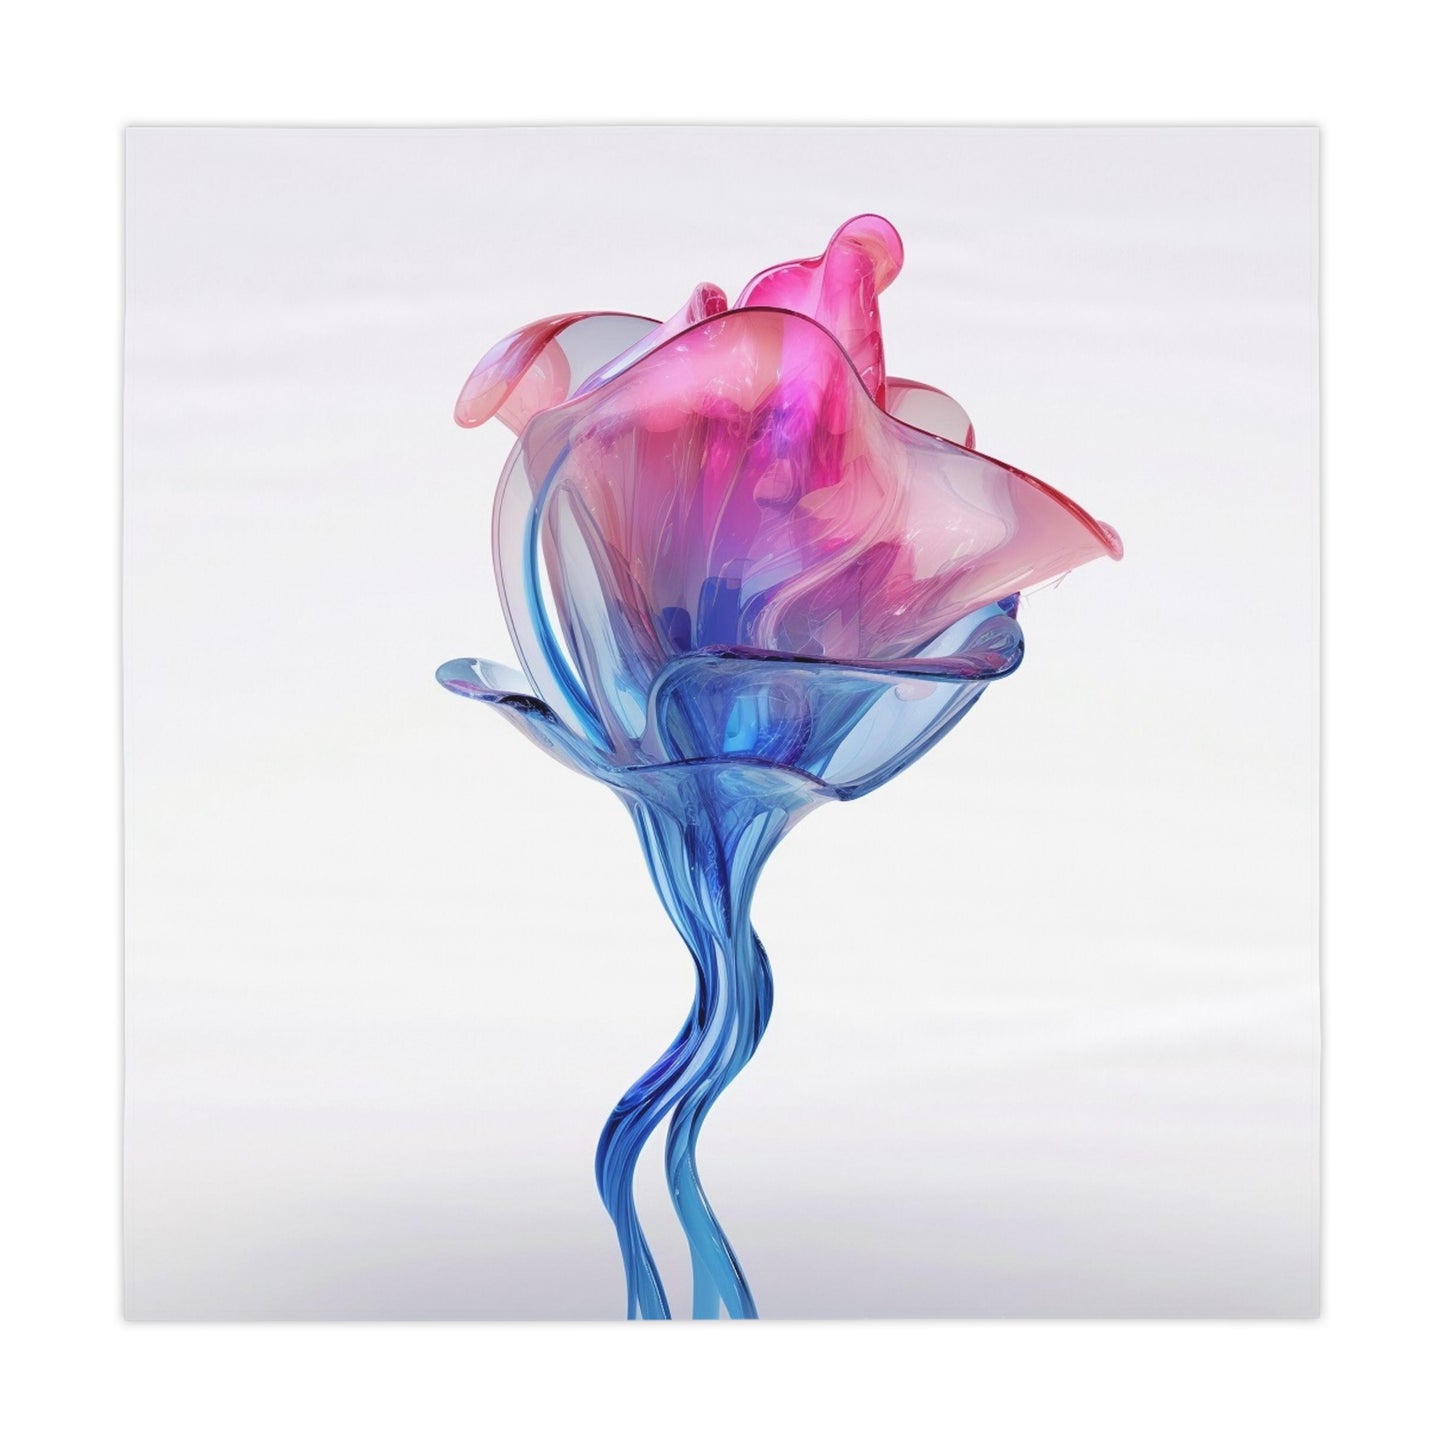 Tablecloth Pink & Blue Tulip Rose 4